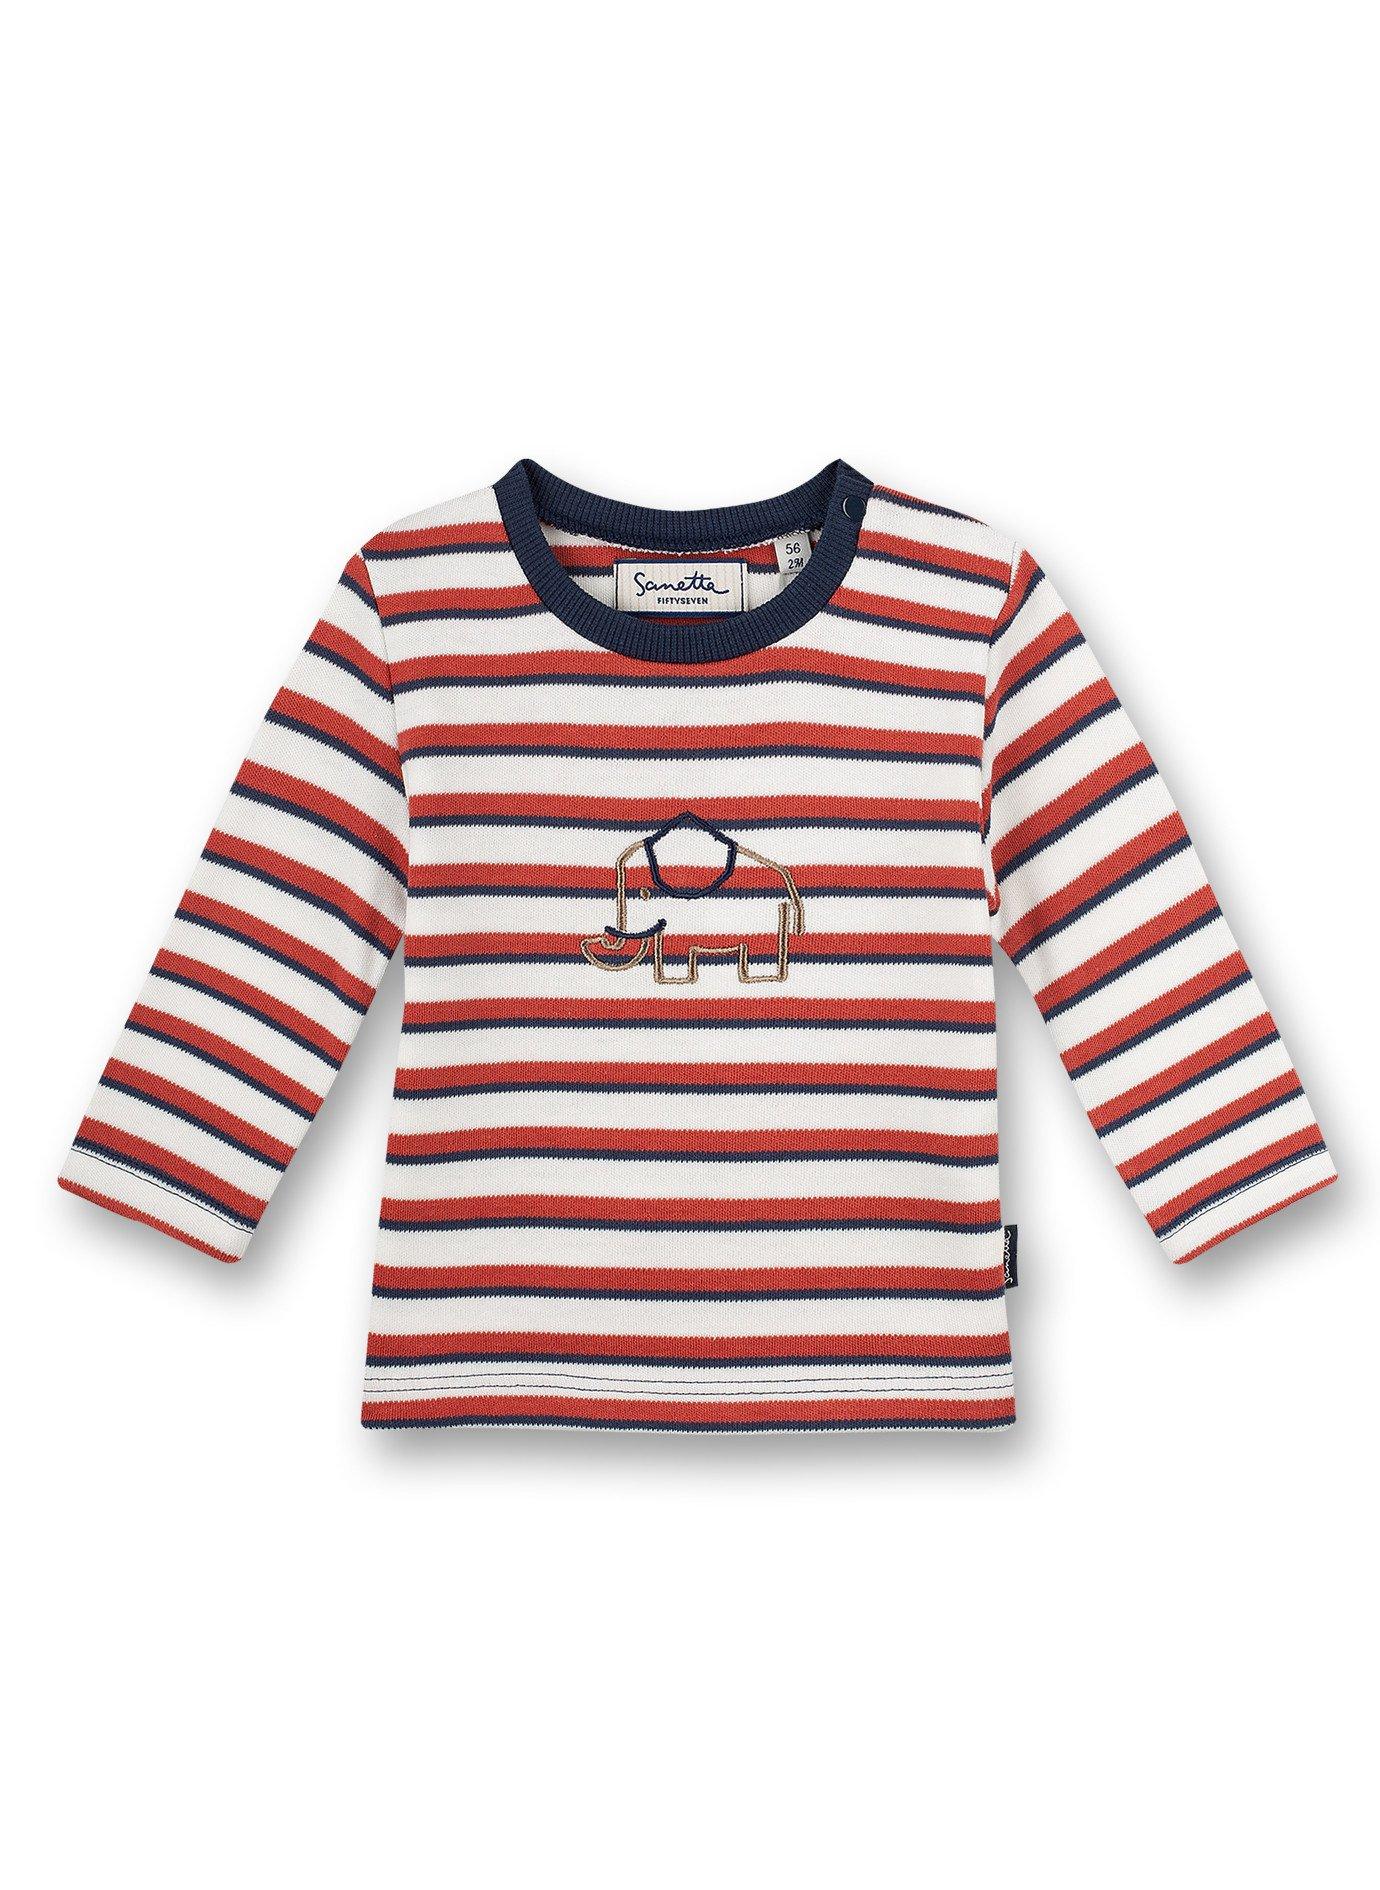 Image of Sanetta Fiftyseven Baby Jungen Shirt Family Elephant - 56